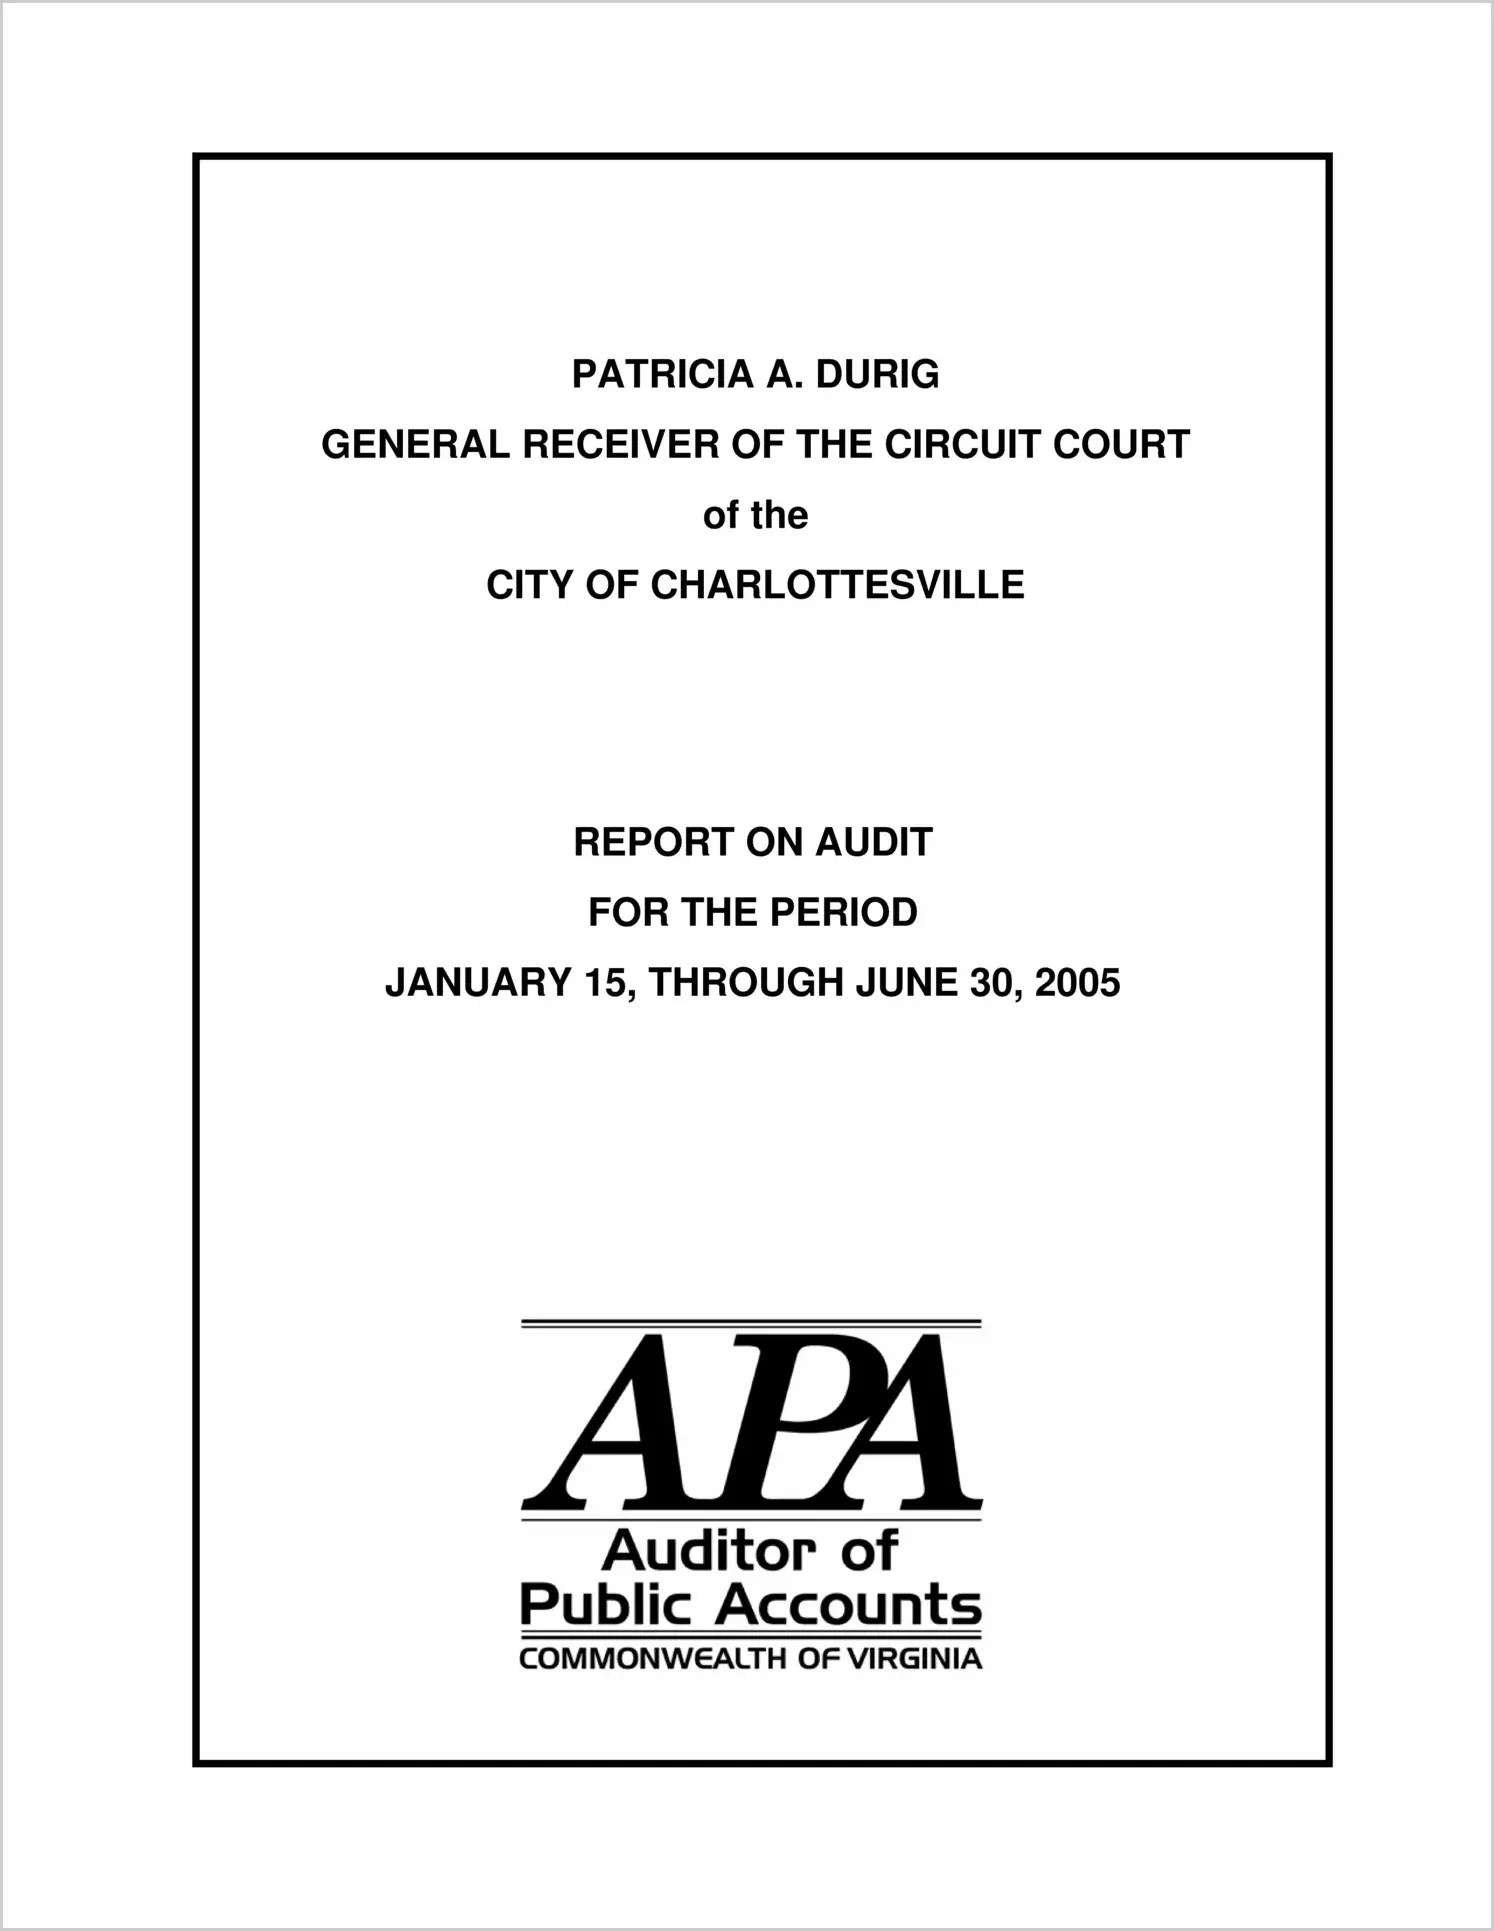 General Receiver of the Circuit Court of the City of Charlottesville for the period January 15, 2005  through June 30, 2005